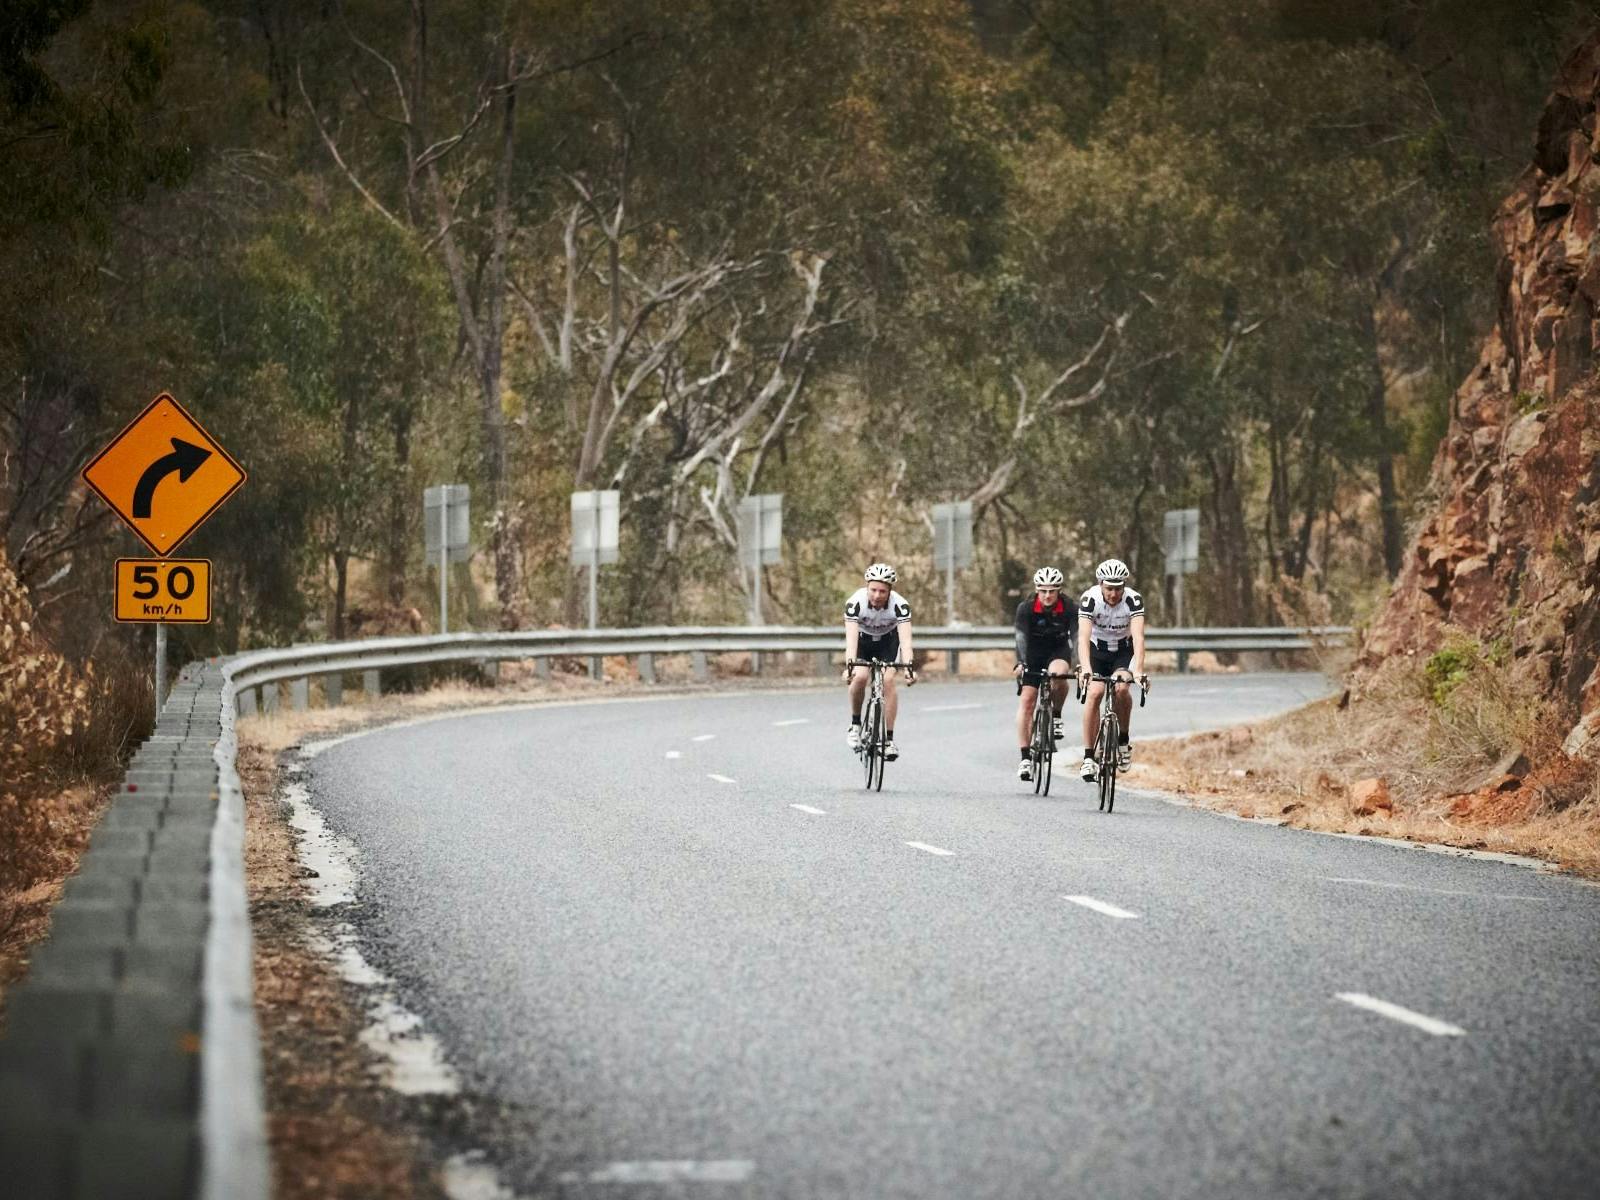 Cyclists road riding down a hill gum trees in background rocky cliff face on right hand side